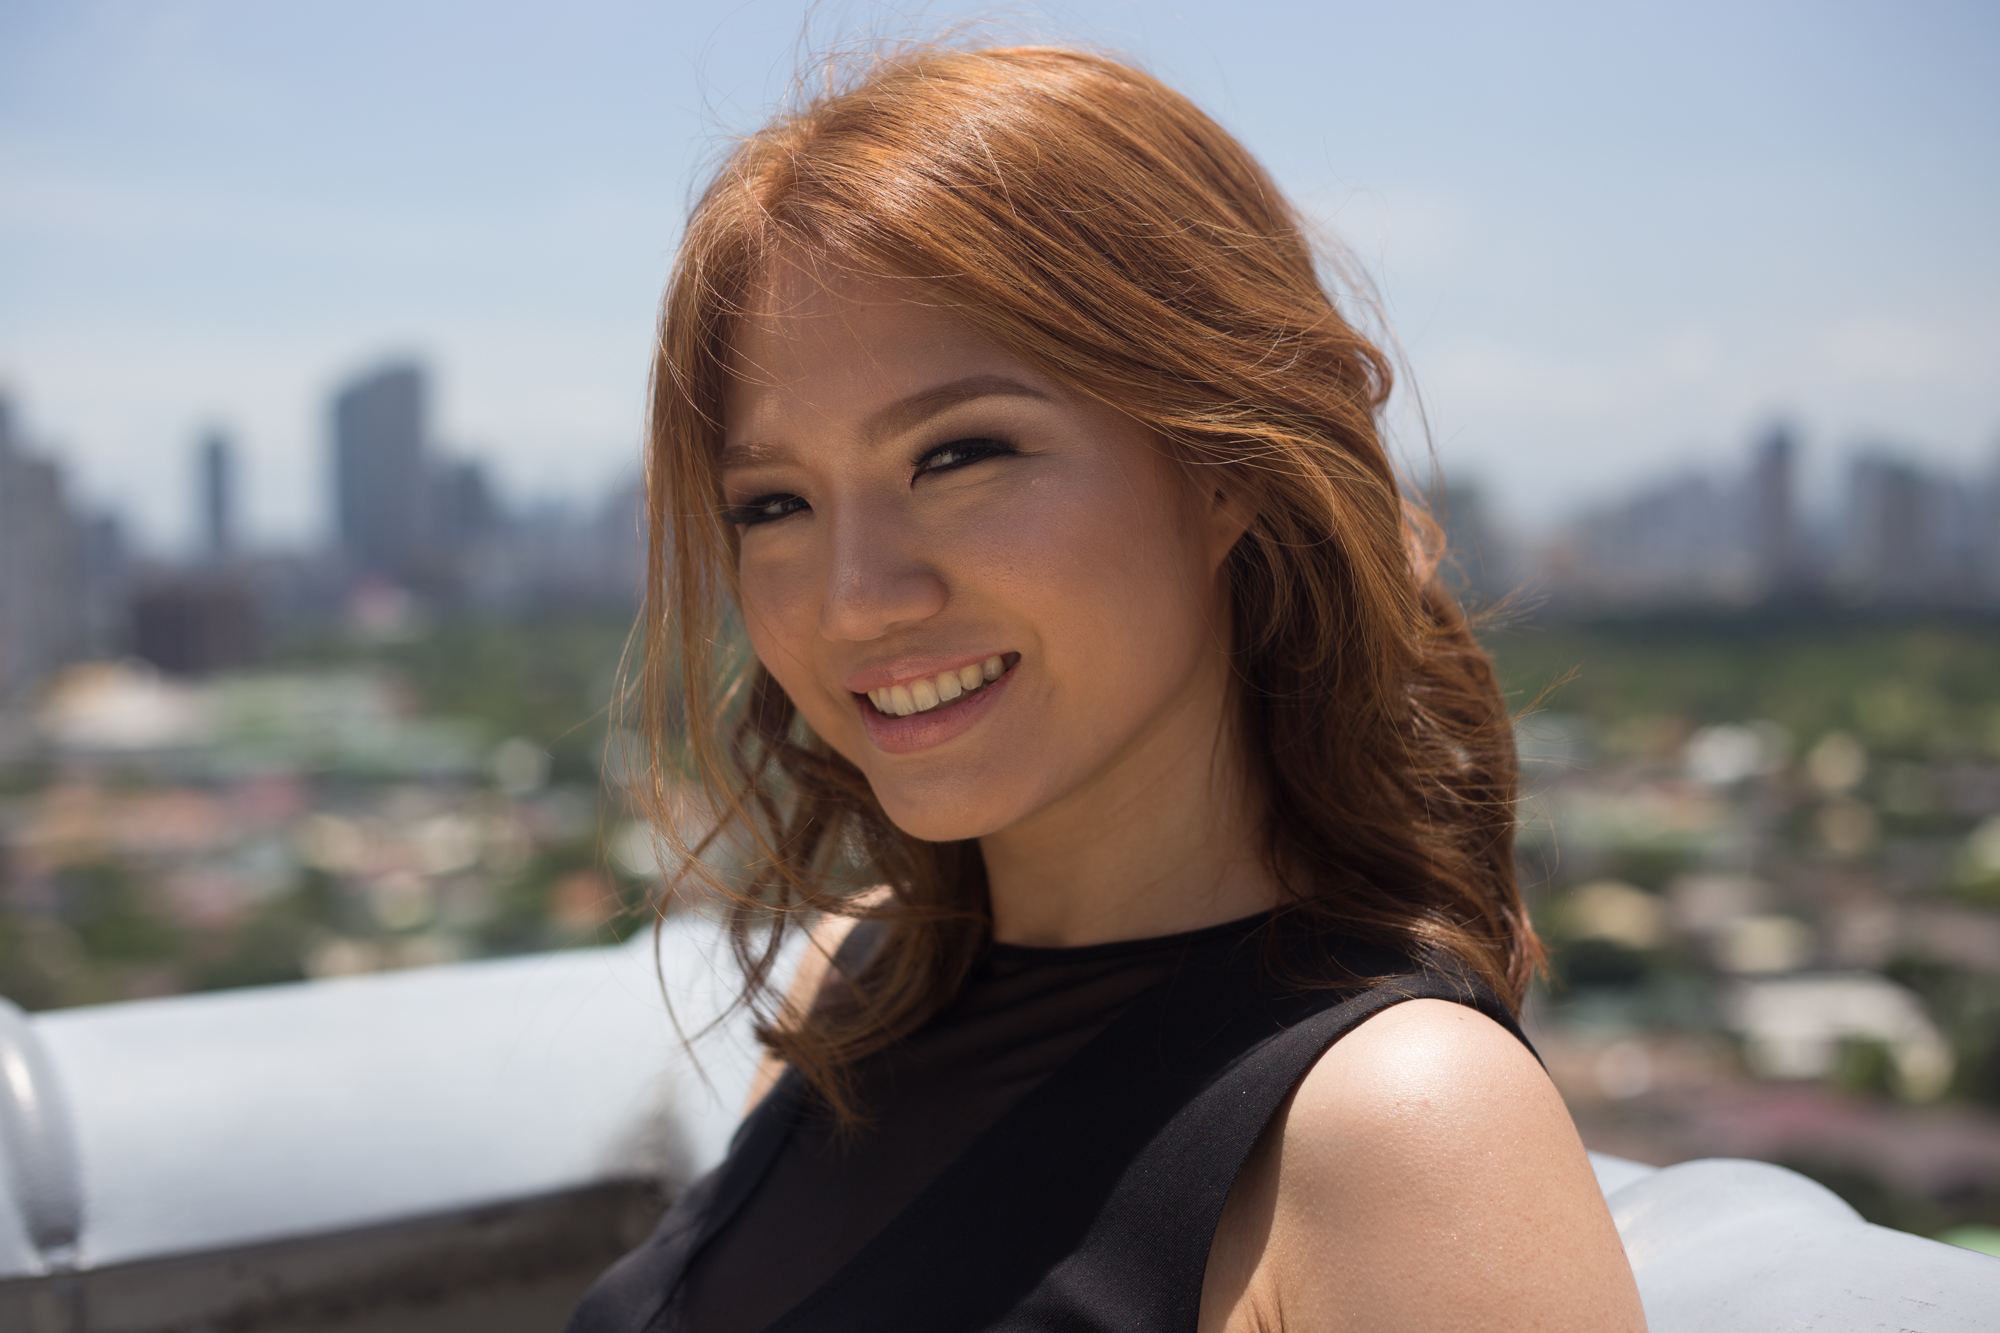 Lifestyle journalist Cheryl Tiu opens up about what makes a good restaurant